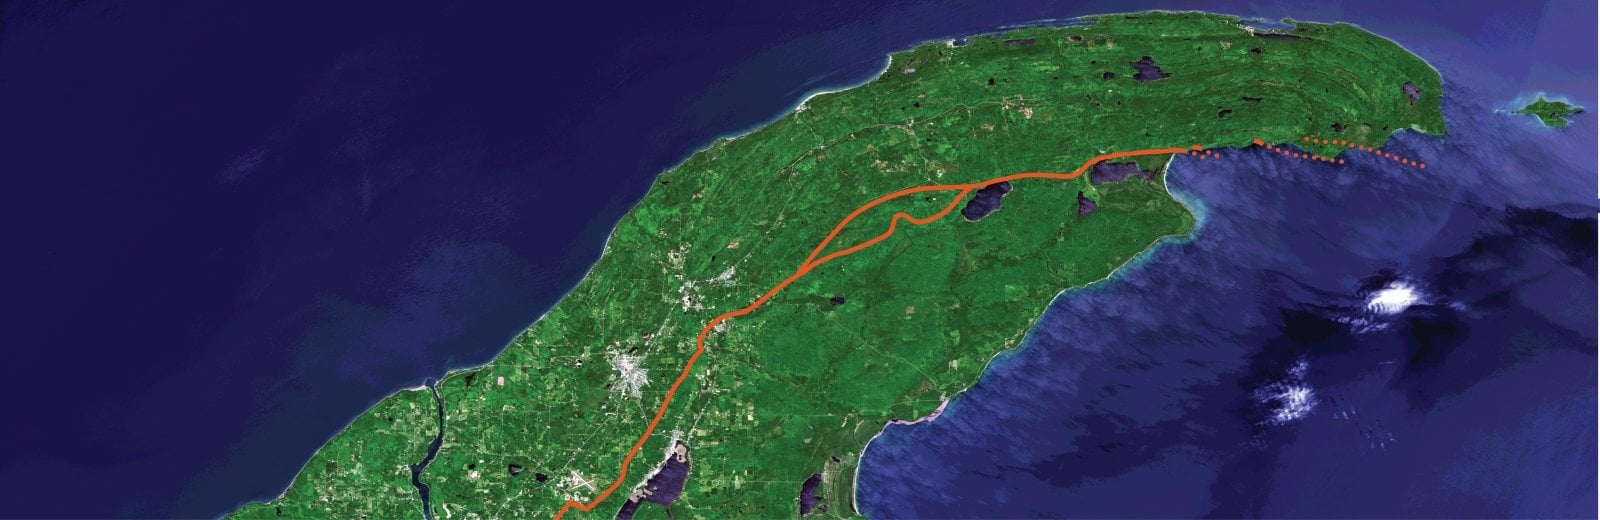 The orange line is the current interpretation of the Keweenaw Fault location. Based on Graff and Tyrrellâ€™s observations and analysis, the fault appears to be a system of splay faults (shown here by dotted lines) rather than a single thrust fault. This may indicate the termination of the fault at the eastern end of the Peninsula. Image Credit: Landsat satellite image of Keweenaw Peninsula provided by DigitalGlobe, a Maxar company.